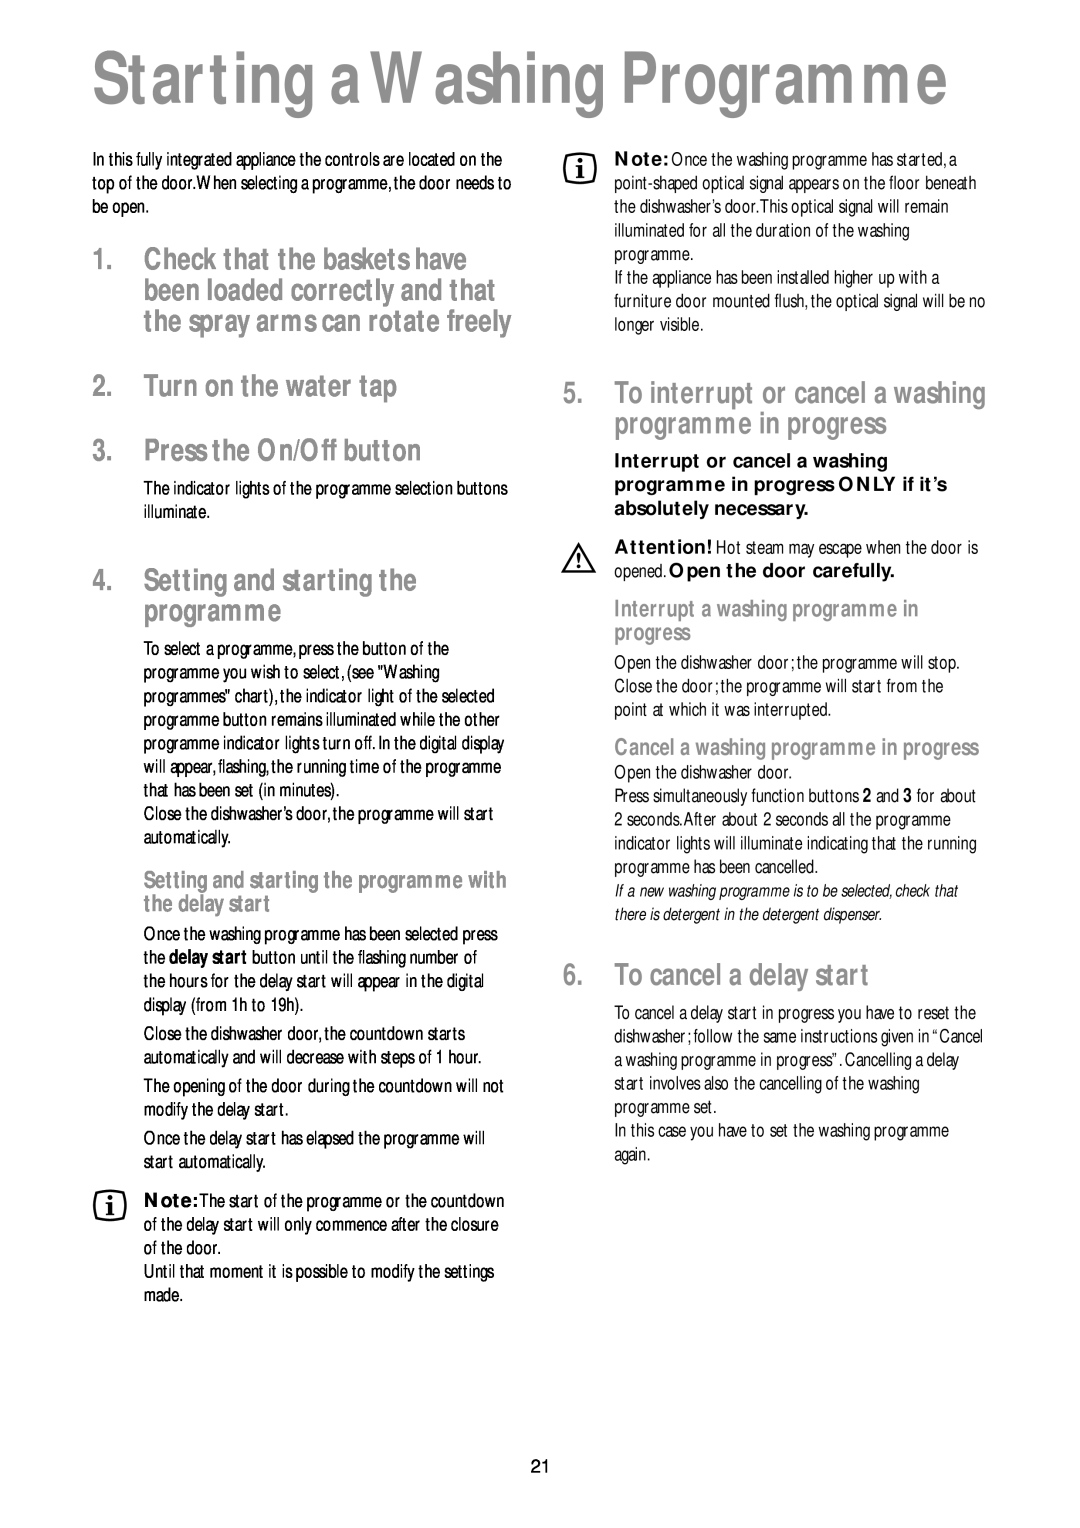 John Lewis JLBIDW 901 instruction manual Starting a Washing Programme, Turn on the water tap 3. Press the On/Off button 